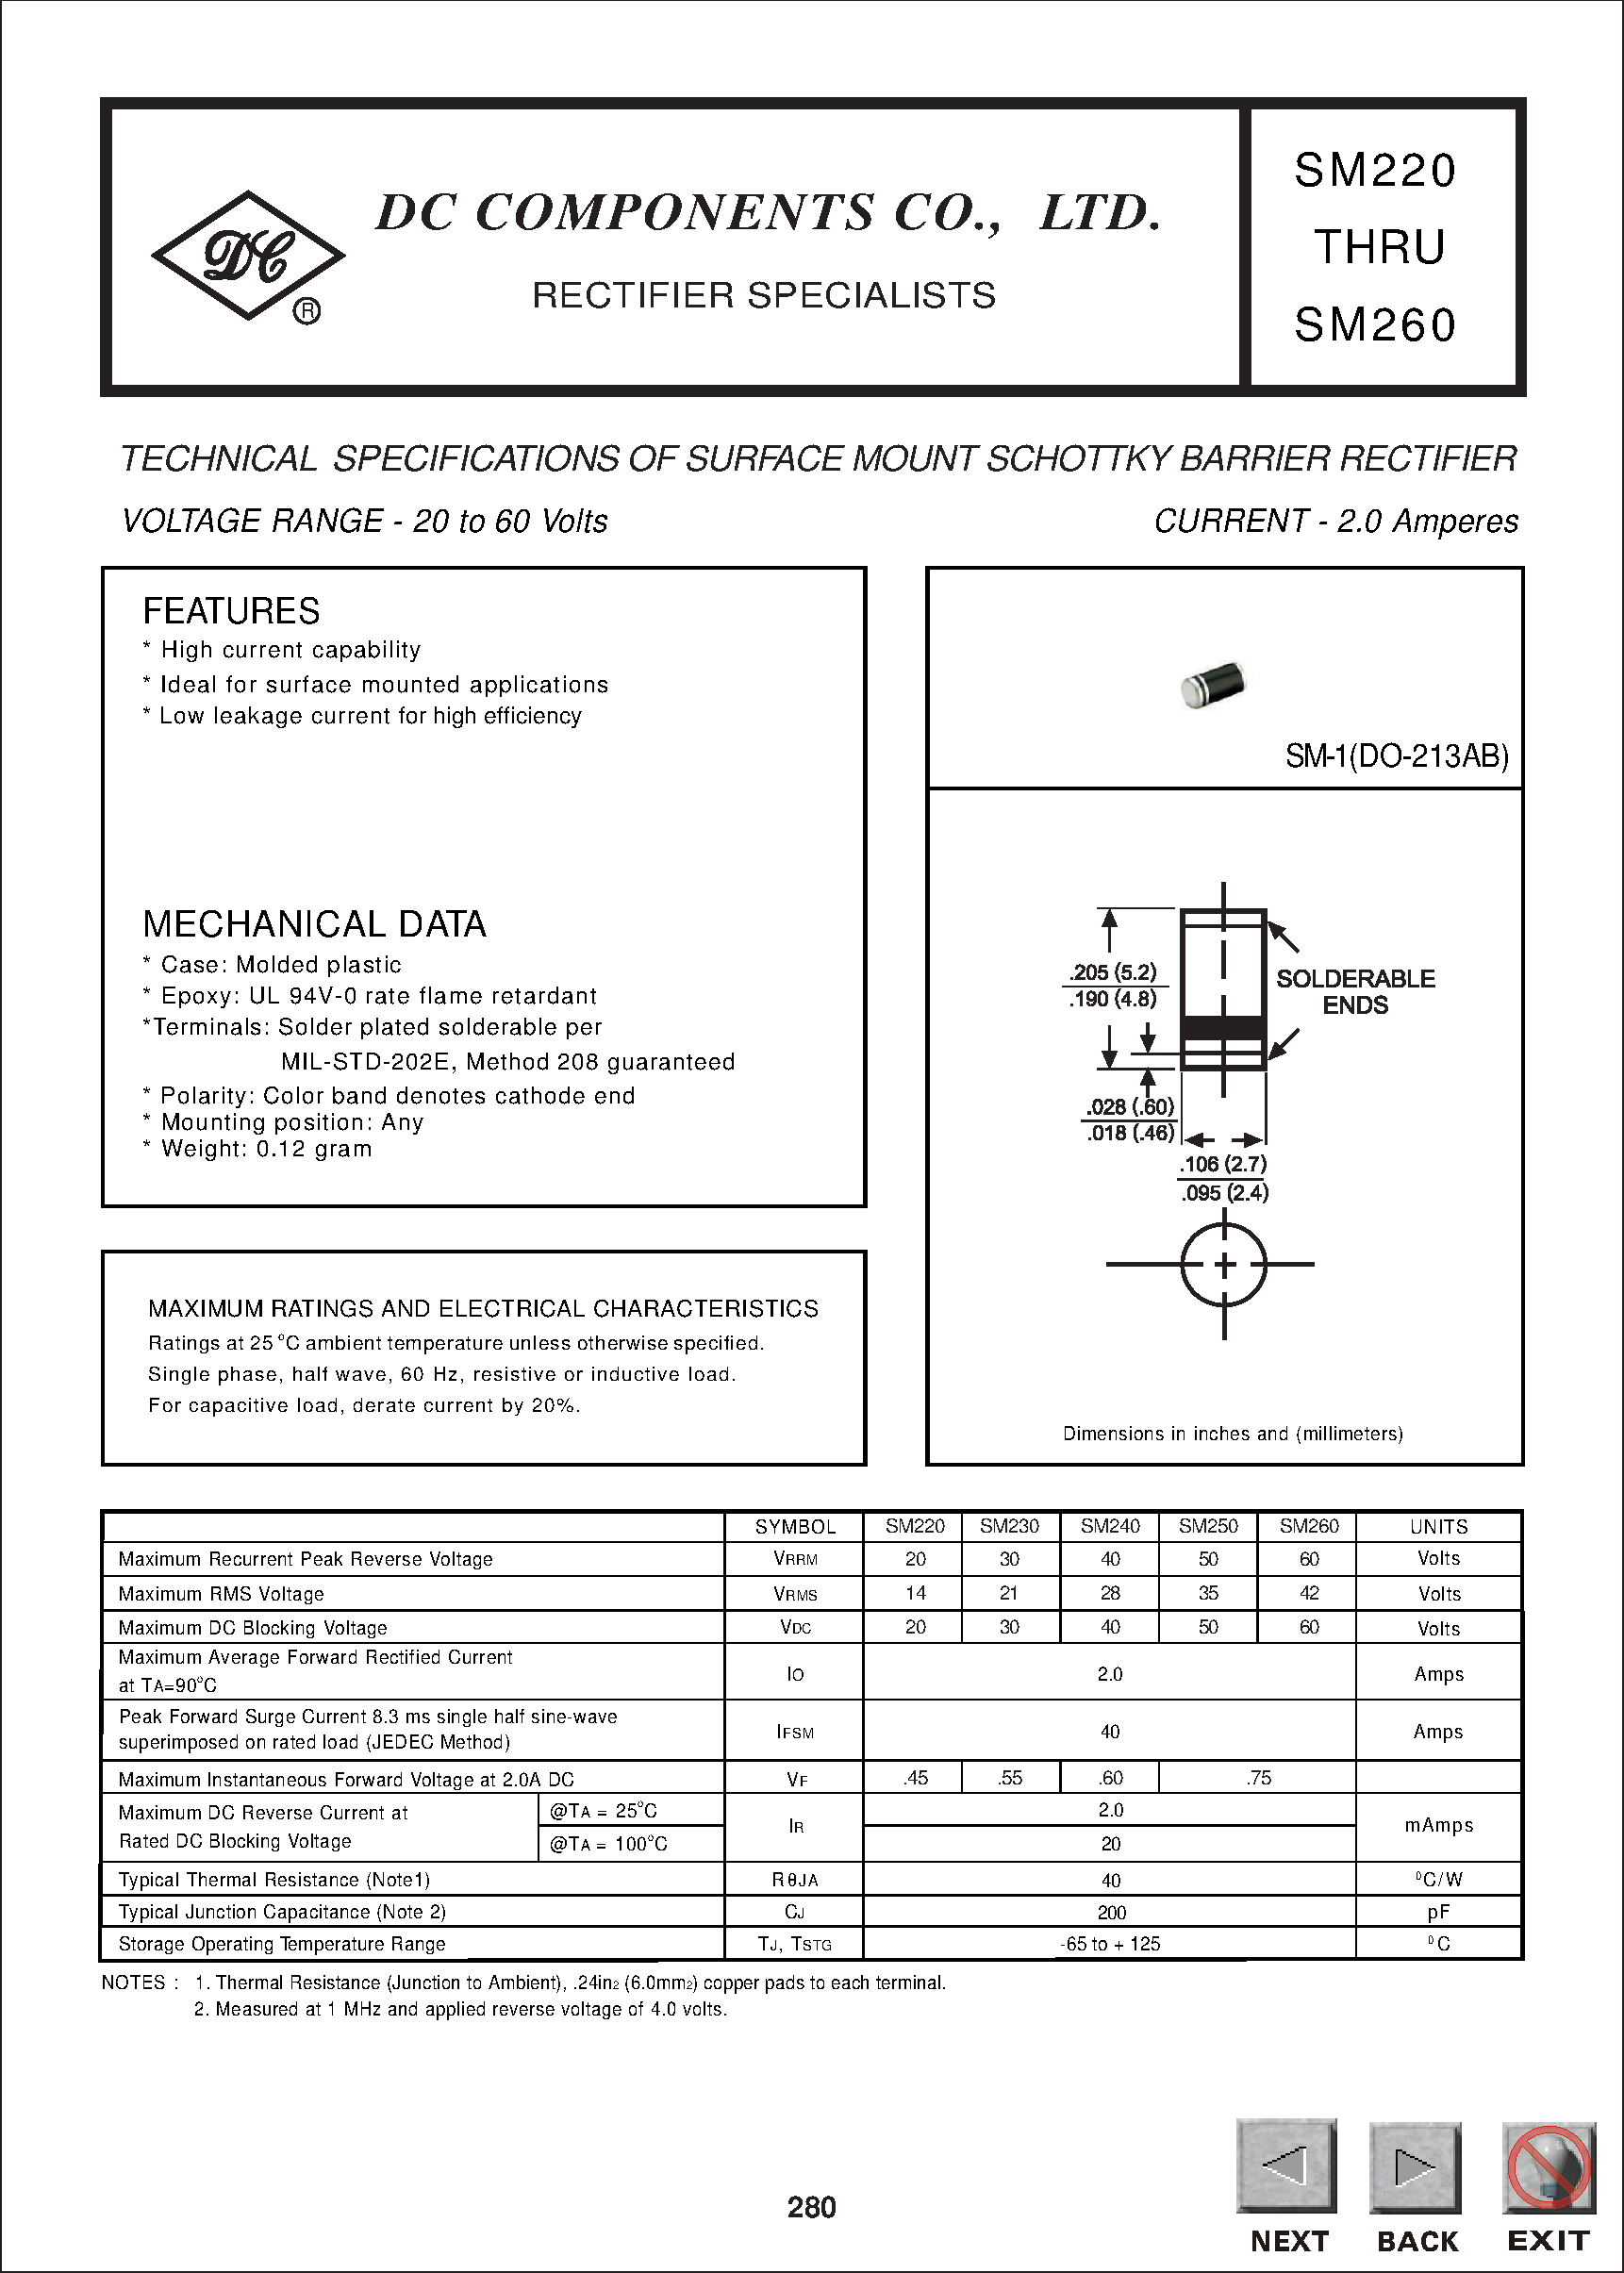 Даташит SM250 - TECHNICAL SPECIFICATIONS OF SURFACE MOUNT SCHOTTKY BARRIER RECTIFIER страница 1